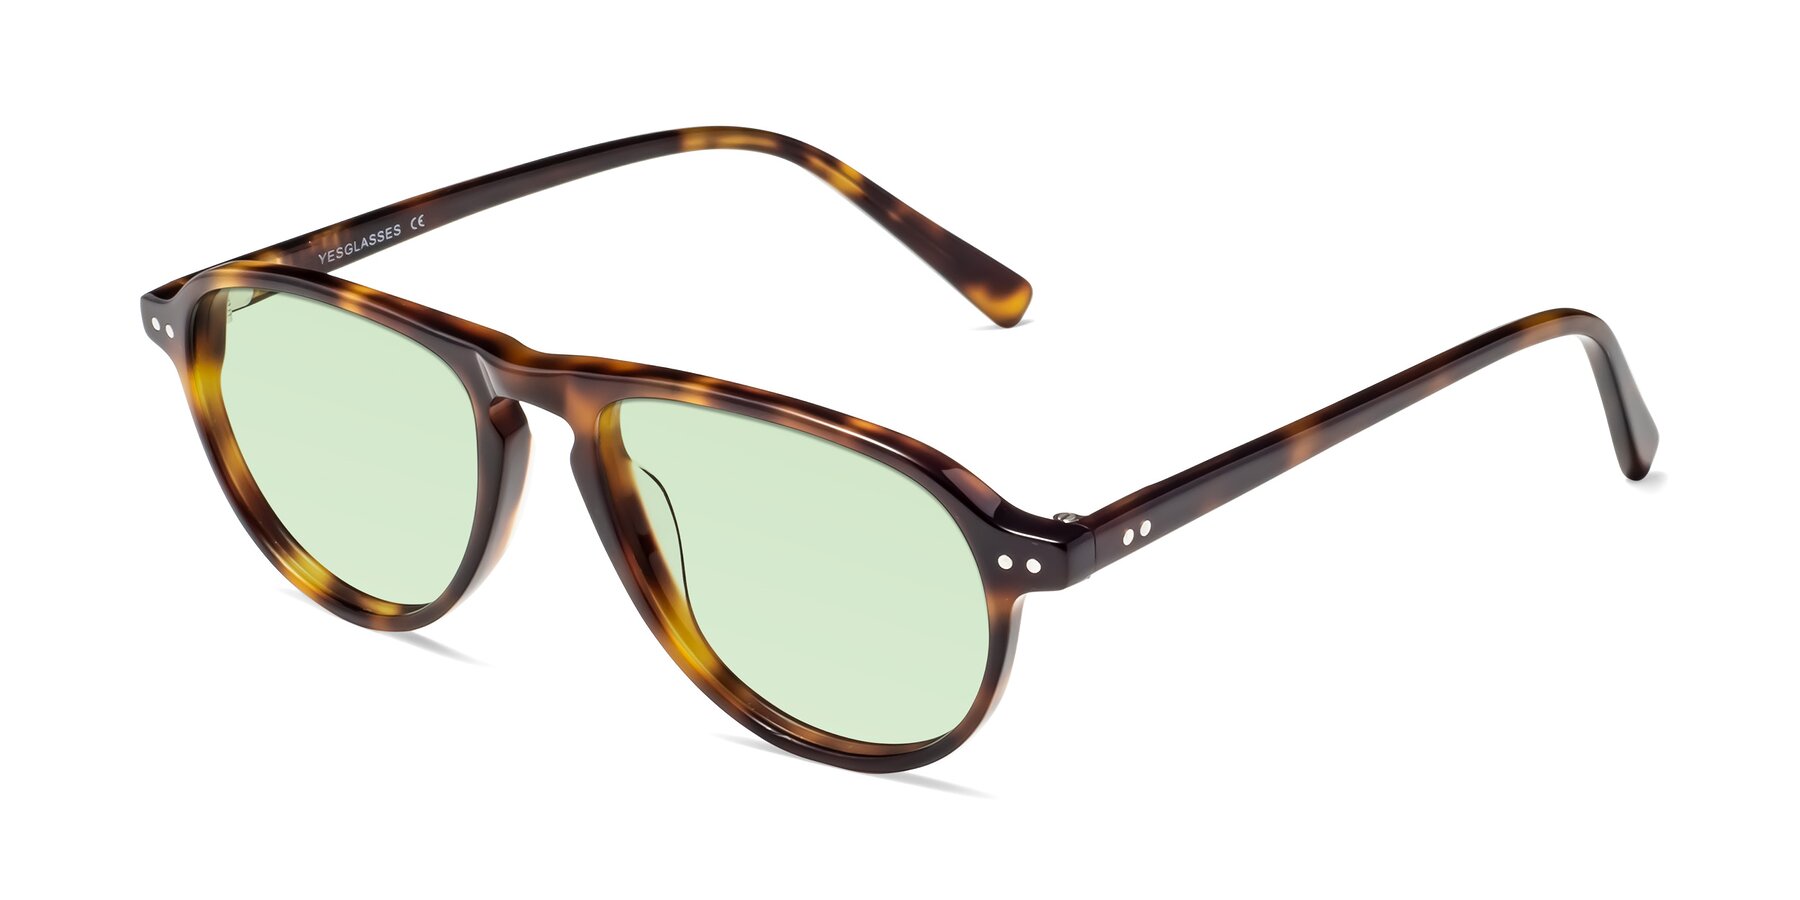 Angle of 17544 in Tortoise with Light Green Tinted Lenses